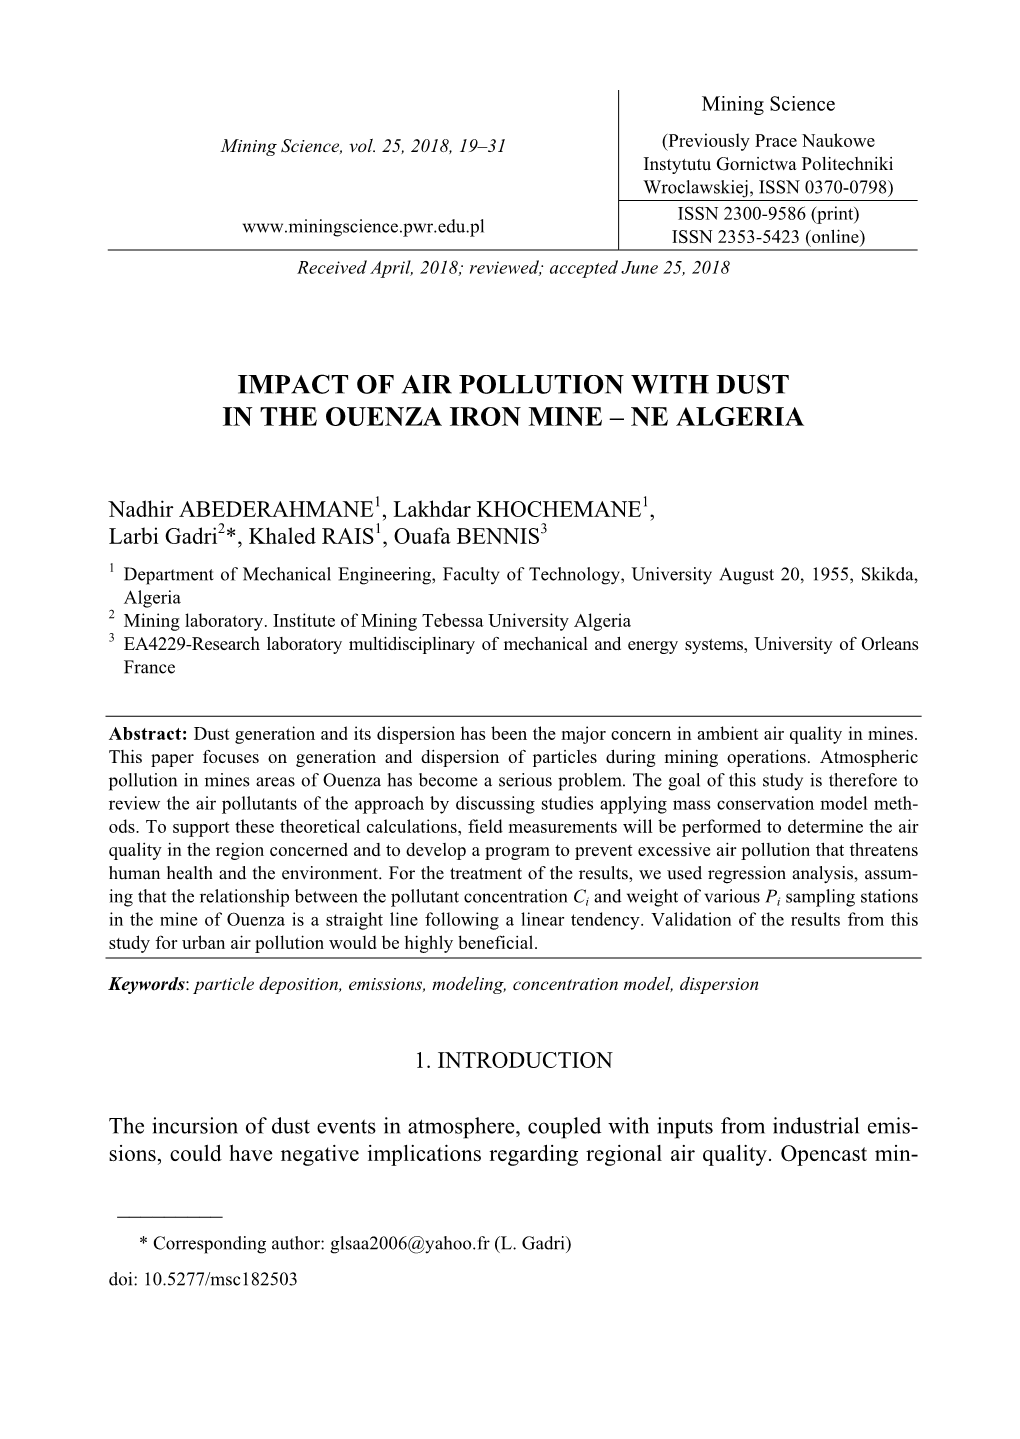 Impact of Air Pollution with Dust in the Ouenza Iron Mine – Ne Algeria